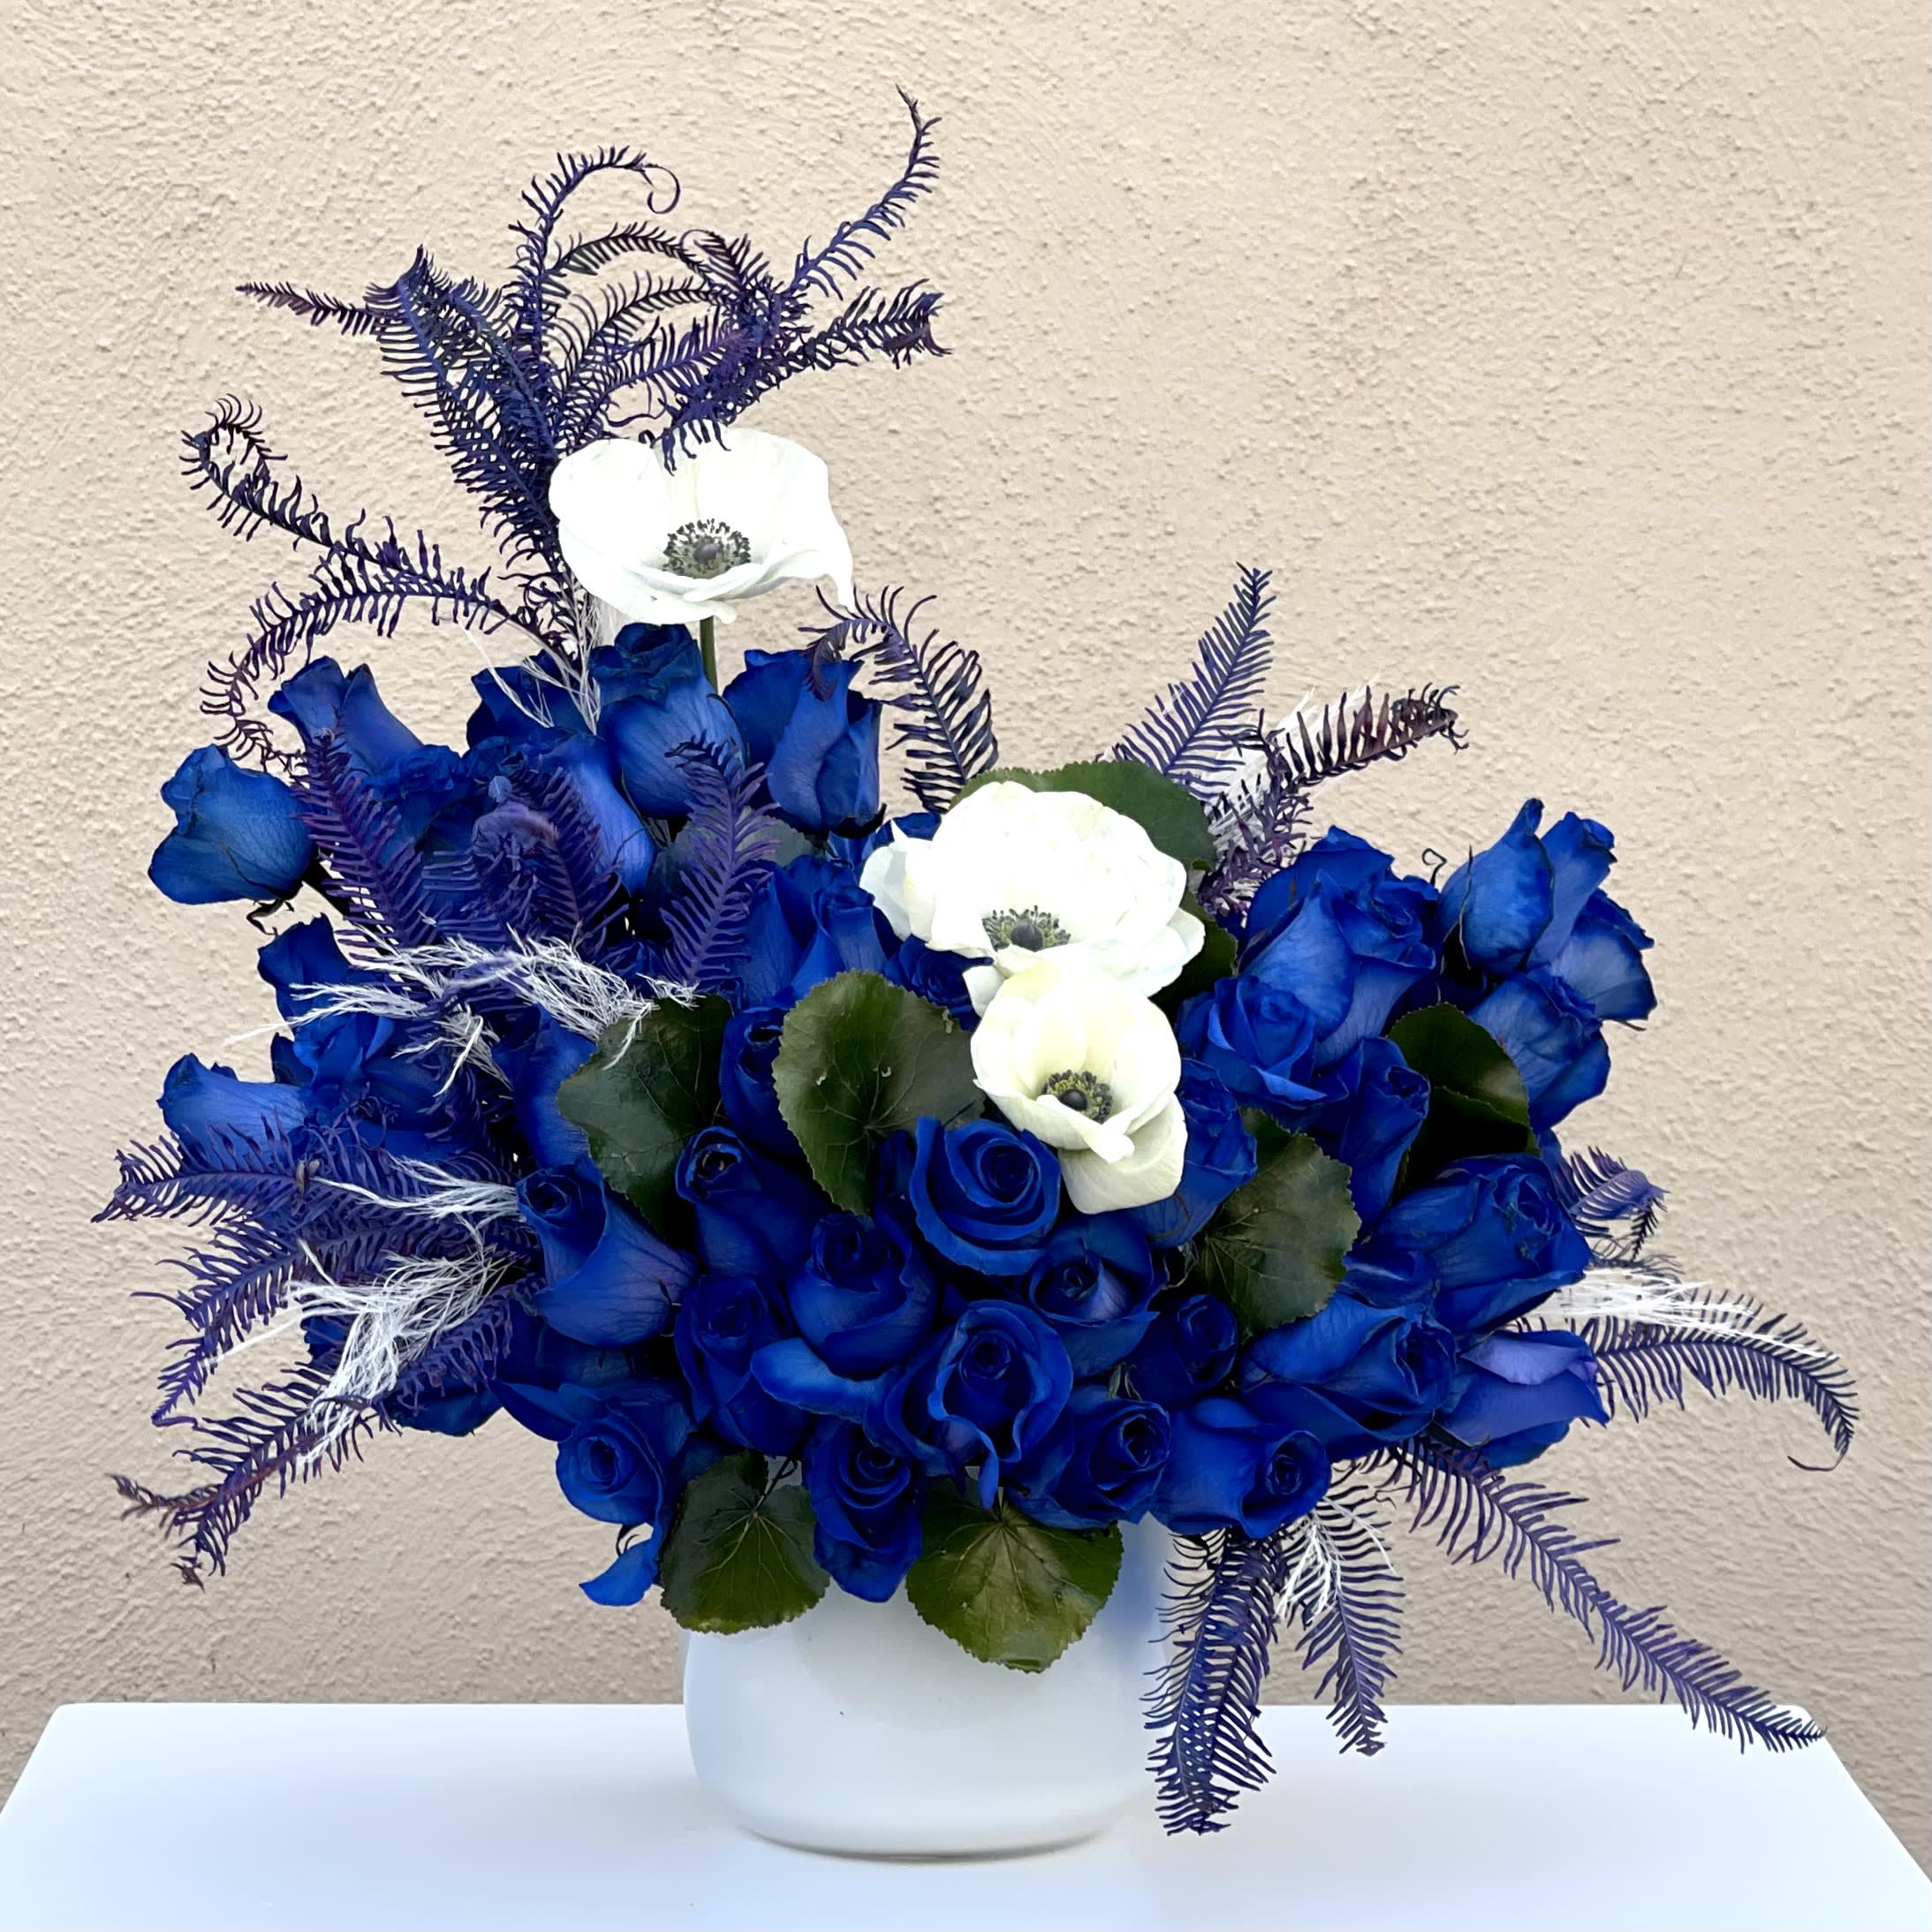 Singing the Blues - This modern blue arrangement featuring over 50 blooms of blue roses and accented with white Anemonies in a matte white vase.